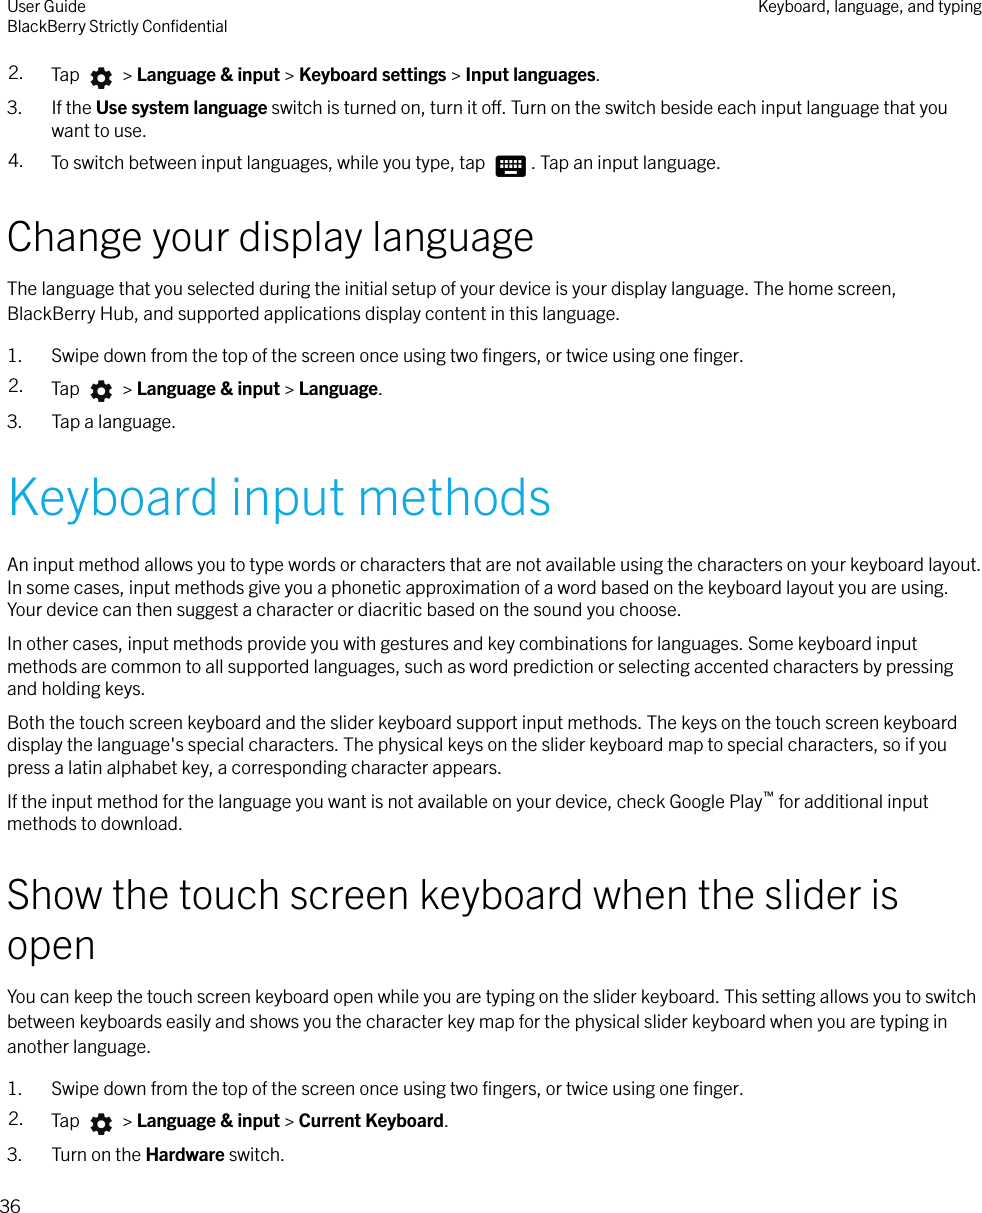 2. Tap   &gt; Language &amp; input &gt; Keyboard settings &gt; Input languages.3. If the Use system language switch is turned on, turn it o. Turn on the switch beside each input language that youwant to use.4. To switch between input languages, while you type, tap  . Tap an input language.Change your display languageThe language that you selected during the initial setup of your device is your display language. The home screen,BlackBerry Hub, and supported applications display content in this language.1. Swipe down from the top of the screen once using two ﬁngers, or twice using one ﬁnger.2. Tap   &gt; Language &amp; input &gt; Language.3. Tap a language.Keyboard input methodsAn input method allows you to type words or characters that are not available using the characters on your keyboard layout.In some cases, input methods give you a phonetic approximation of a word based on the keyboard layout you are using.Your device can then suggest a character or diacritic based on the sound you choose.In other cases, input methods provide you with gestures and key combinations for languages. Some keyboard inputmethods are common to all supported languages, such as word prediction or selecting accented characters by pressingand holding keys.Both the touch screen keyboard and the slider keyboard support input methods. The keys on the touch screen keyboarddisplay the language&apos;s special characters. The physical keys on the slider keyboard map to special characters, so if youpress a latin alphabet key, a corresponding character appears.If the input method for the language you want is not available on your device, check Google Play™ for additional inputmethods to download.Show the touch screen keyboard when the slider isopenYou can keep the touch screen keyboard open while you are typing on the slider keyboard. This setting allows you to switchbetween keyboards easily and shows you the character key map for the physical slider keyboard when you are typing inanother language.1. Swipe down from the top of the screen once using two ﬁngers, or twice using one ﬁnger.2. Tap   &gt; Language &amp; input &gt; Current Keyboard.3. Turn on the Hardware switch.User GuideBlackBerry Strictly ConﬁdentialKeyboard, language, and typing36